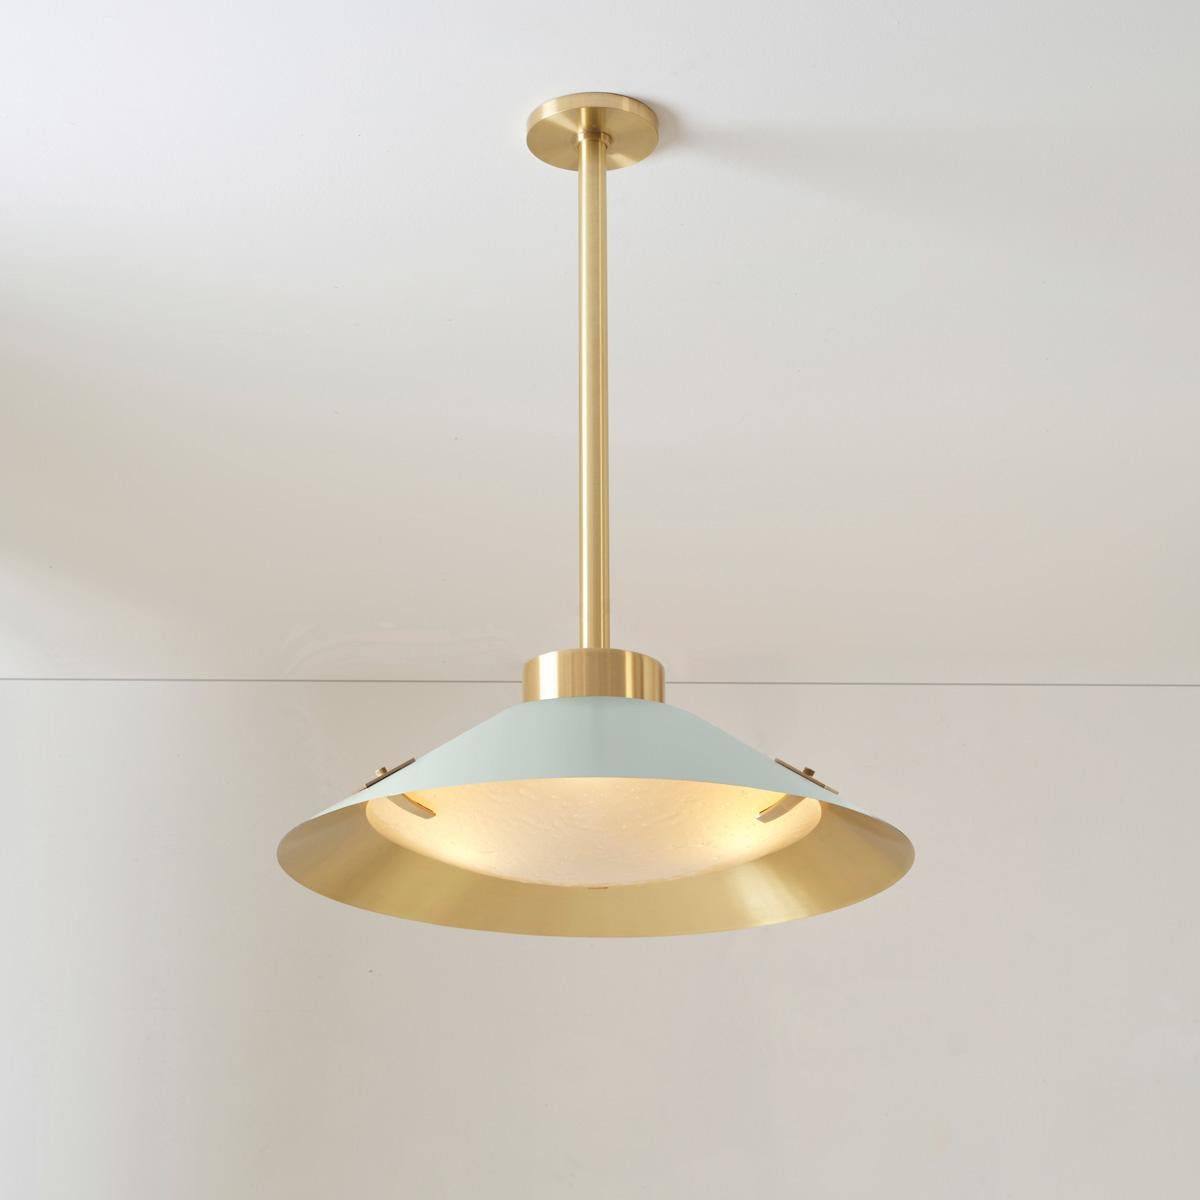 Kono Pendant by Gaspare Asaro. Satin Brass and Sand White For Sale 3